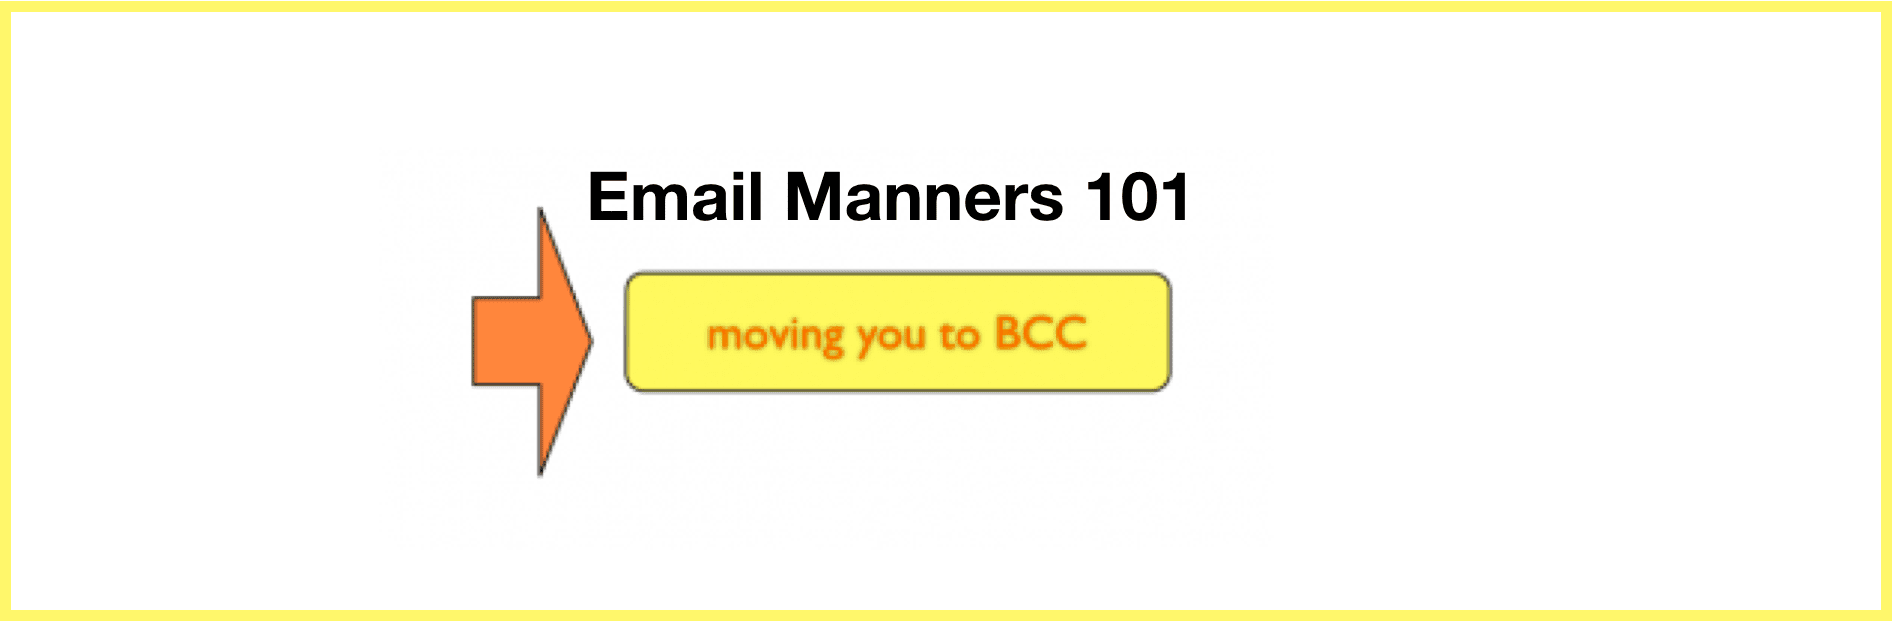 Moving to BCC – Great Email Trick (or Habit!)